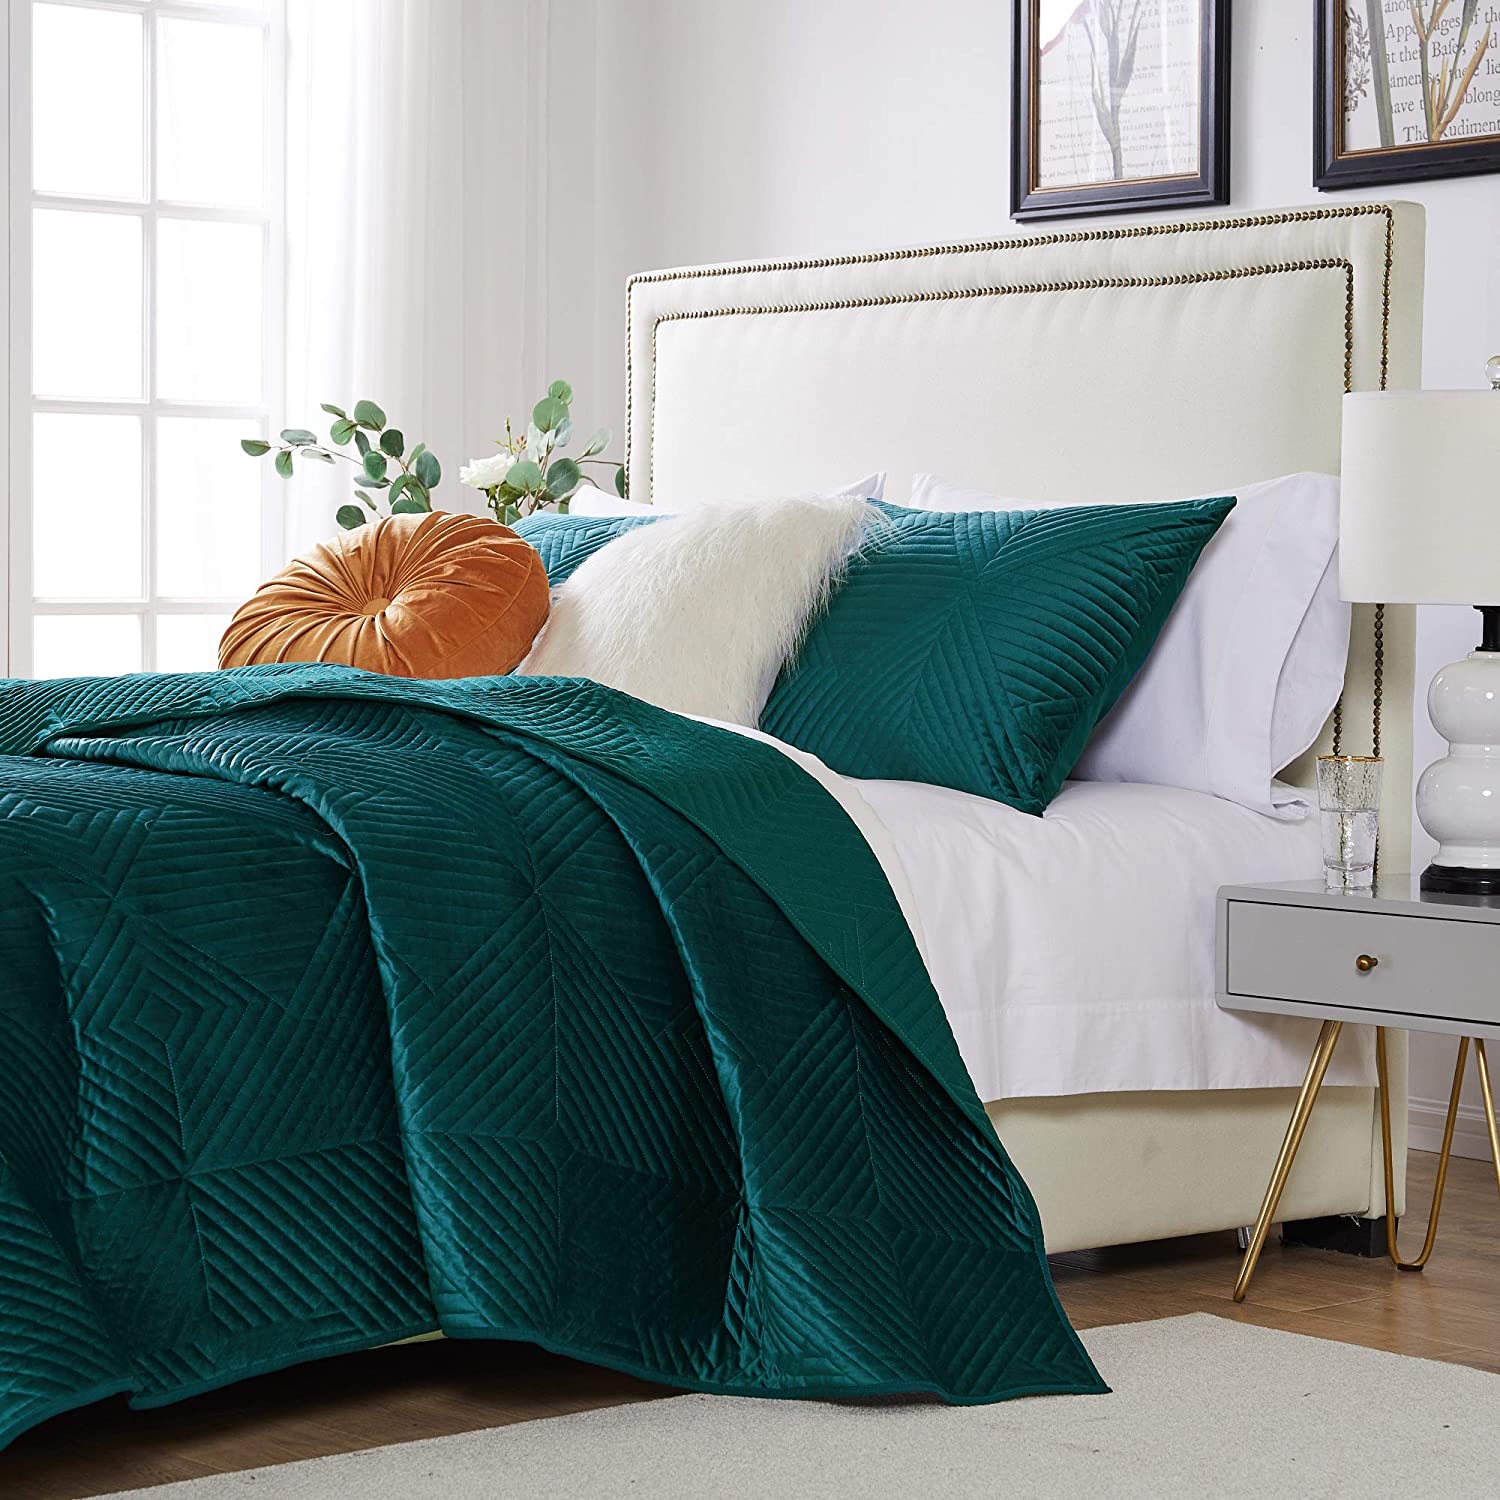 Sage green and white bedroom decor ideas. Pictured: A bedroom.